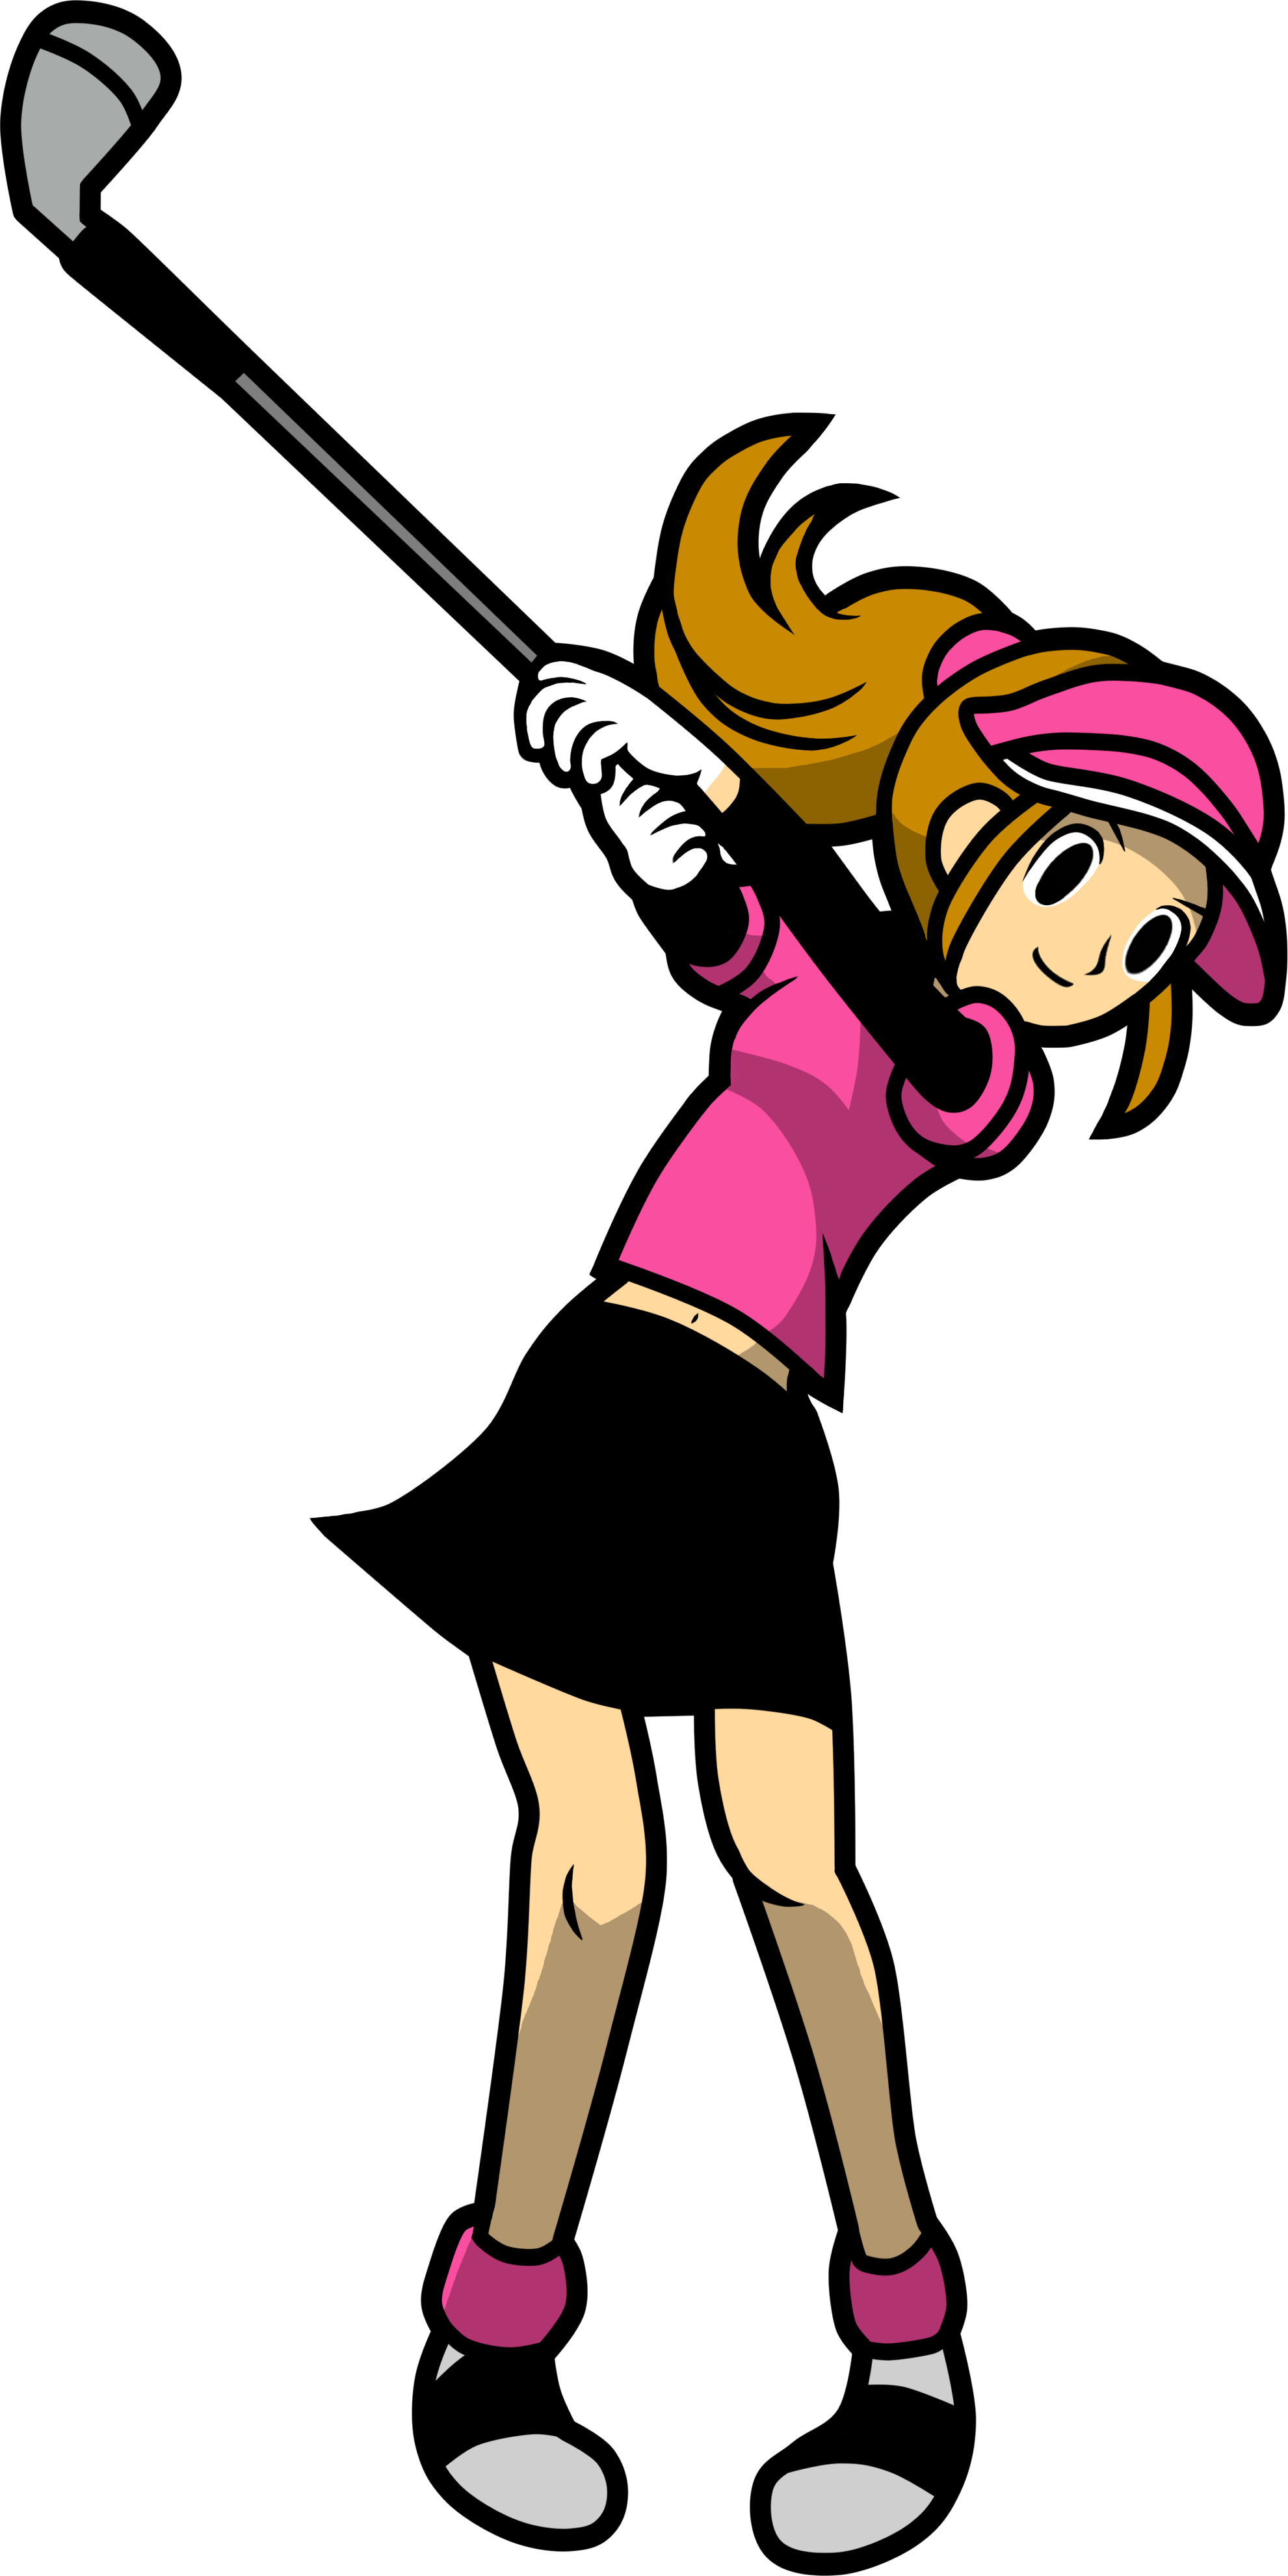 Heaven clipart beautiful place. Image female golfer perfect